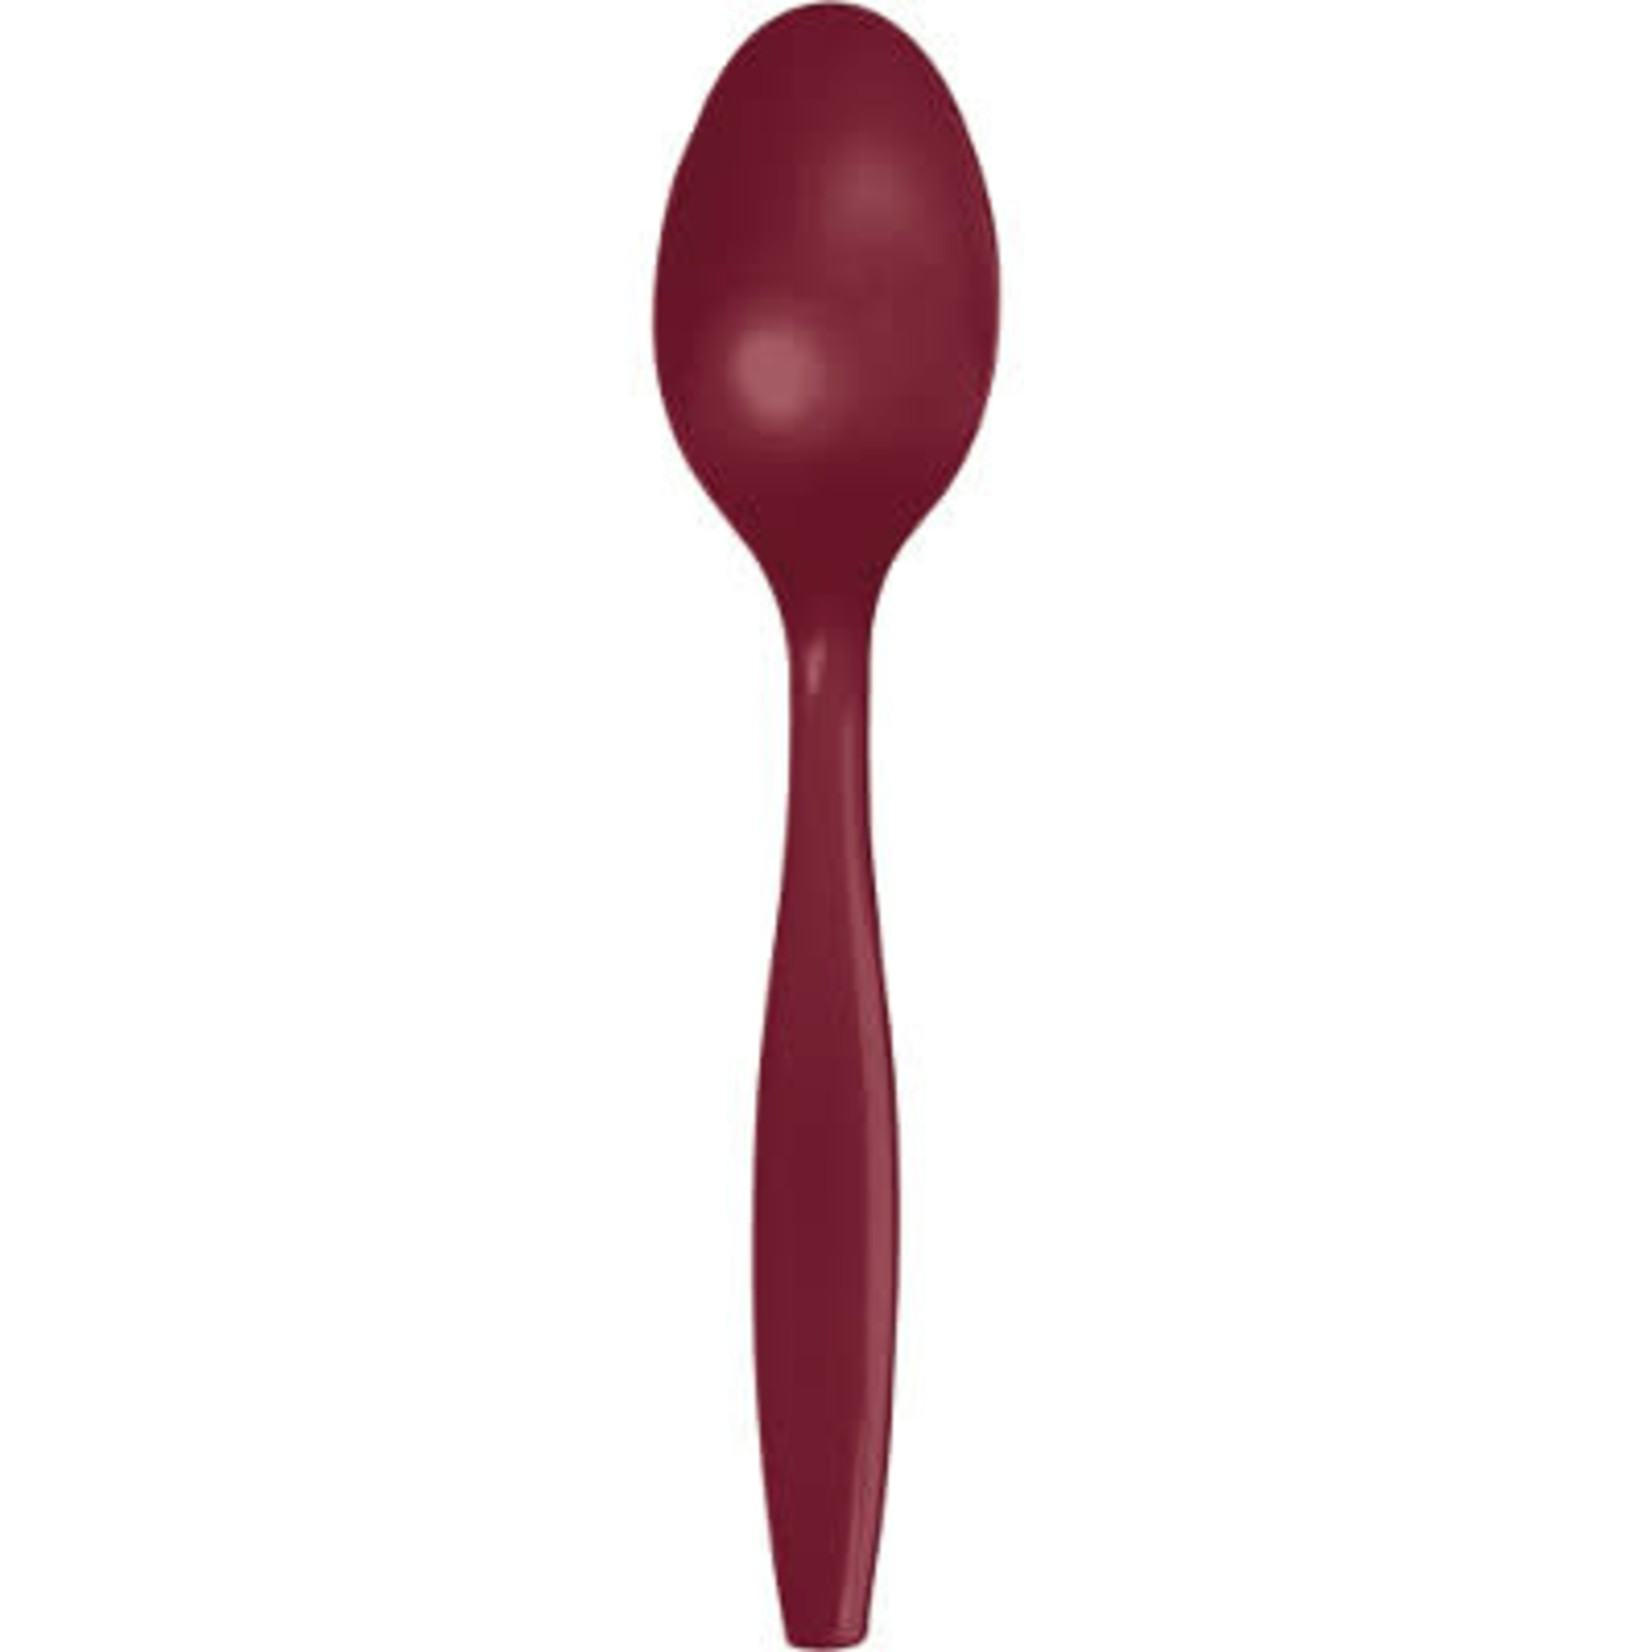 Touch of Color Burgundy Premium Plastic Spoons - 24ct.